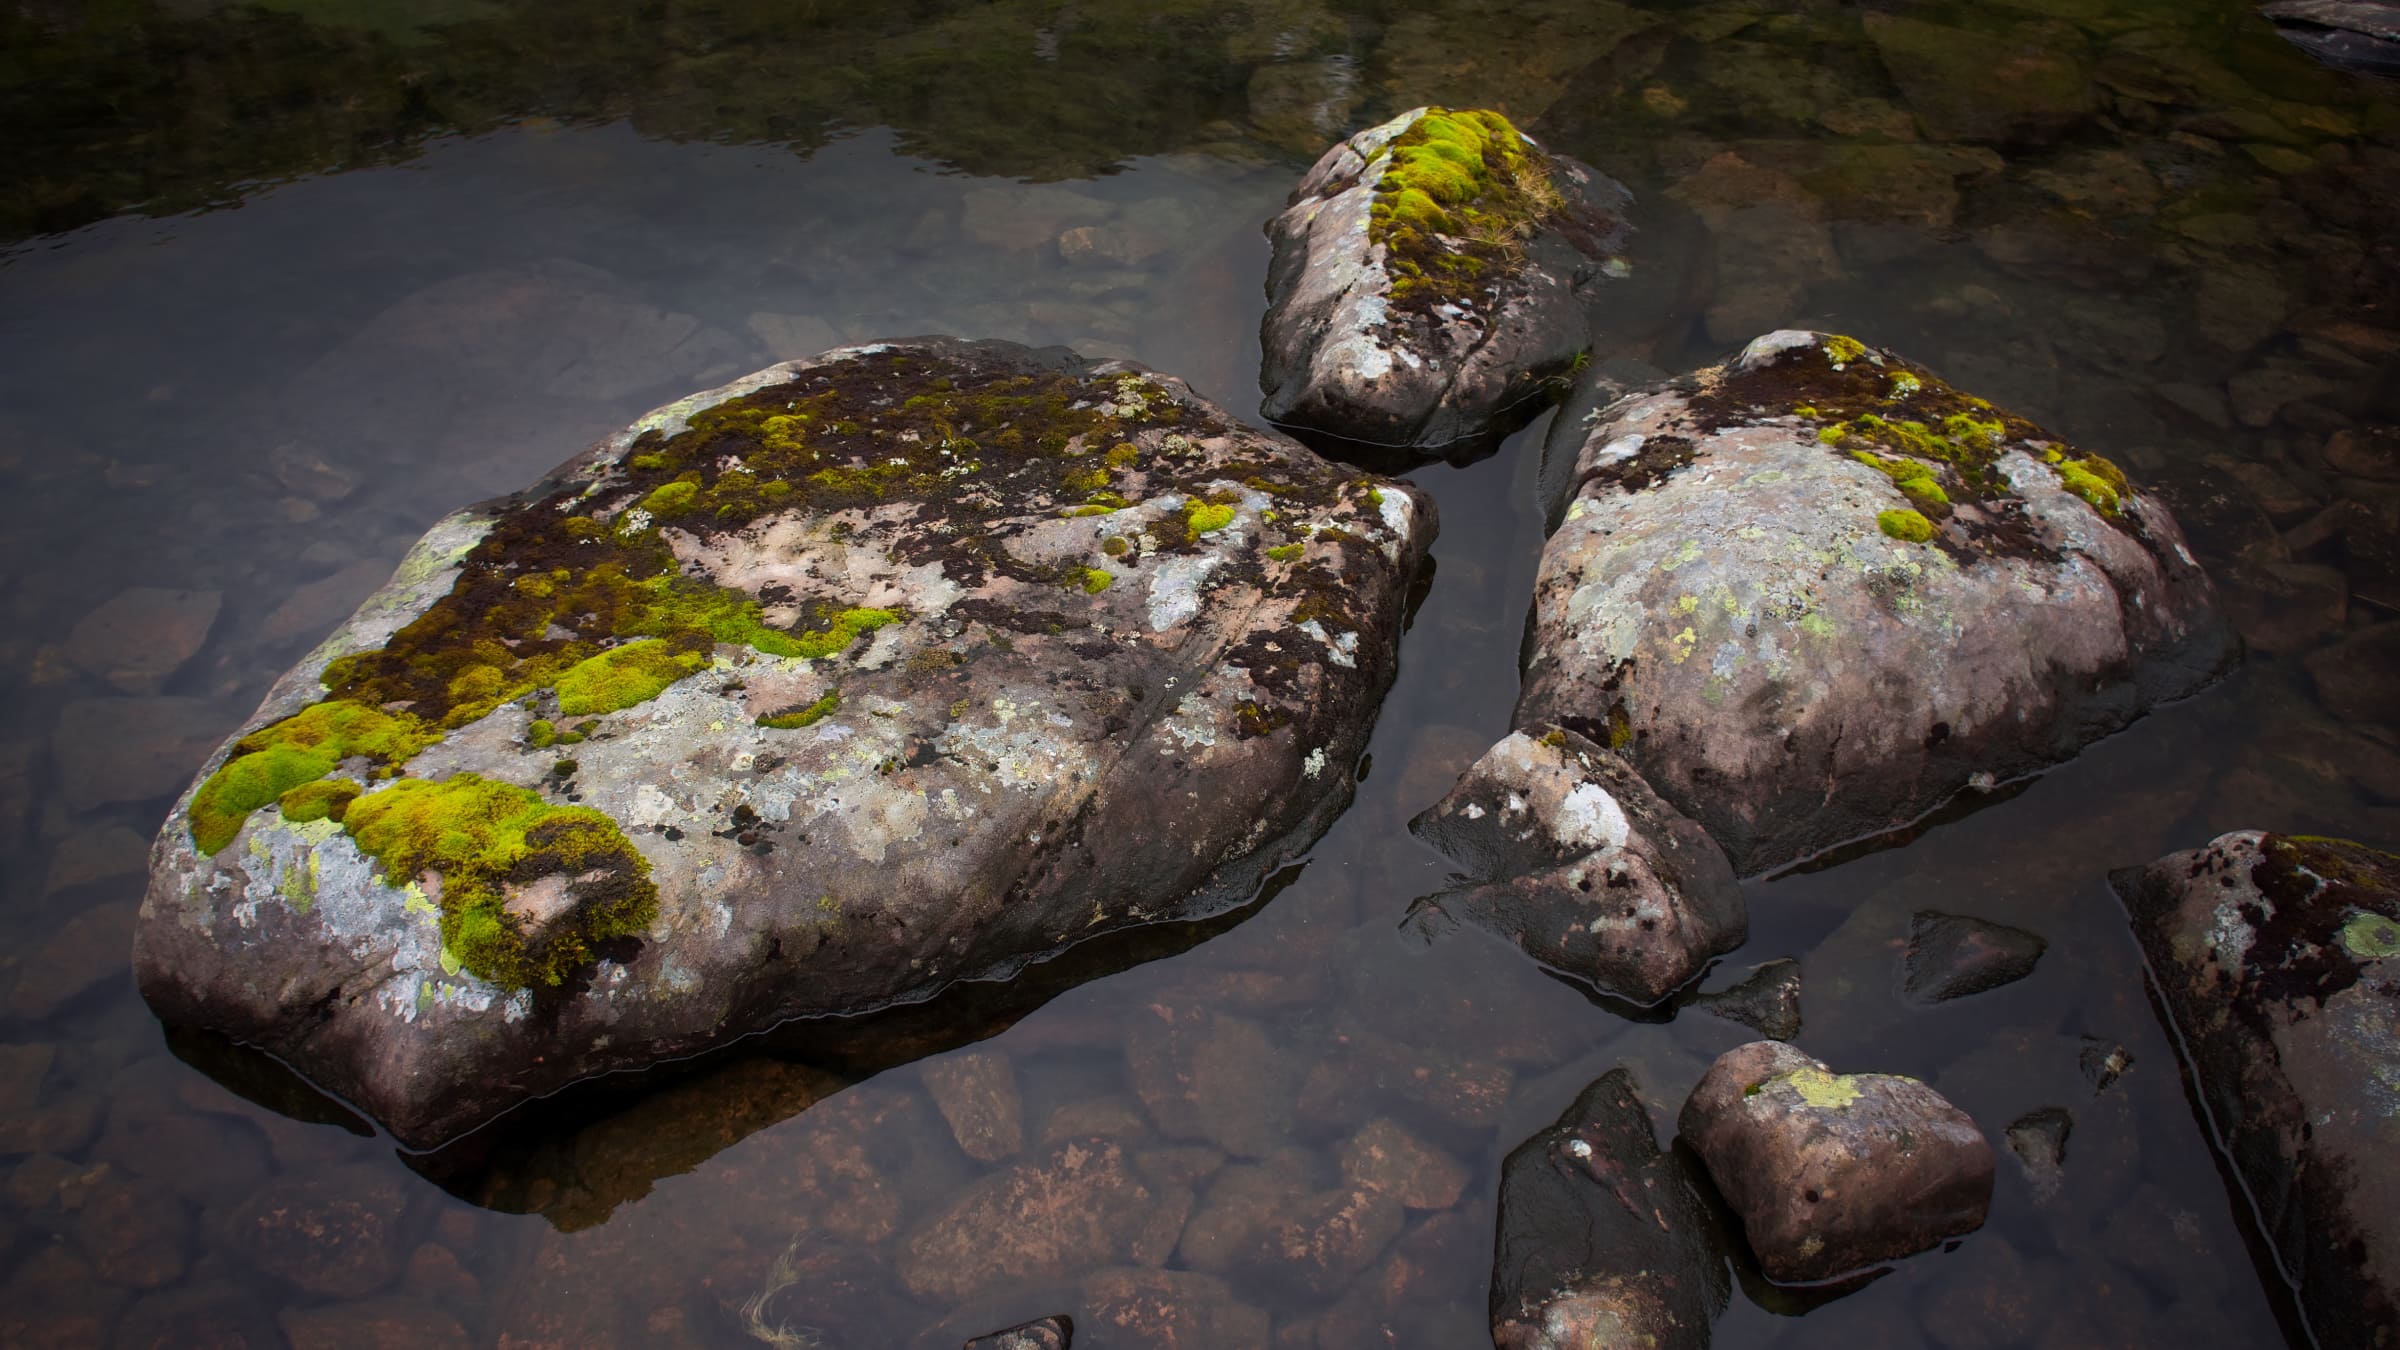 Wet moss and lichen-covered rocks in a shallow pool